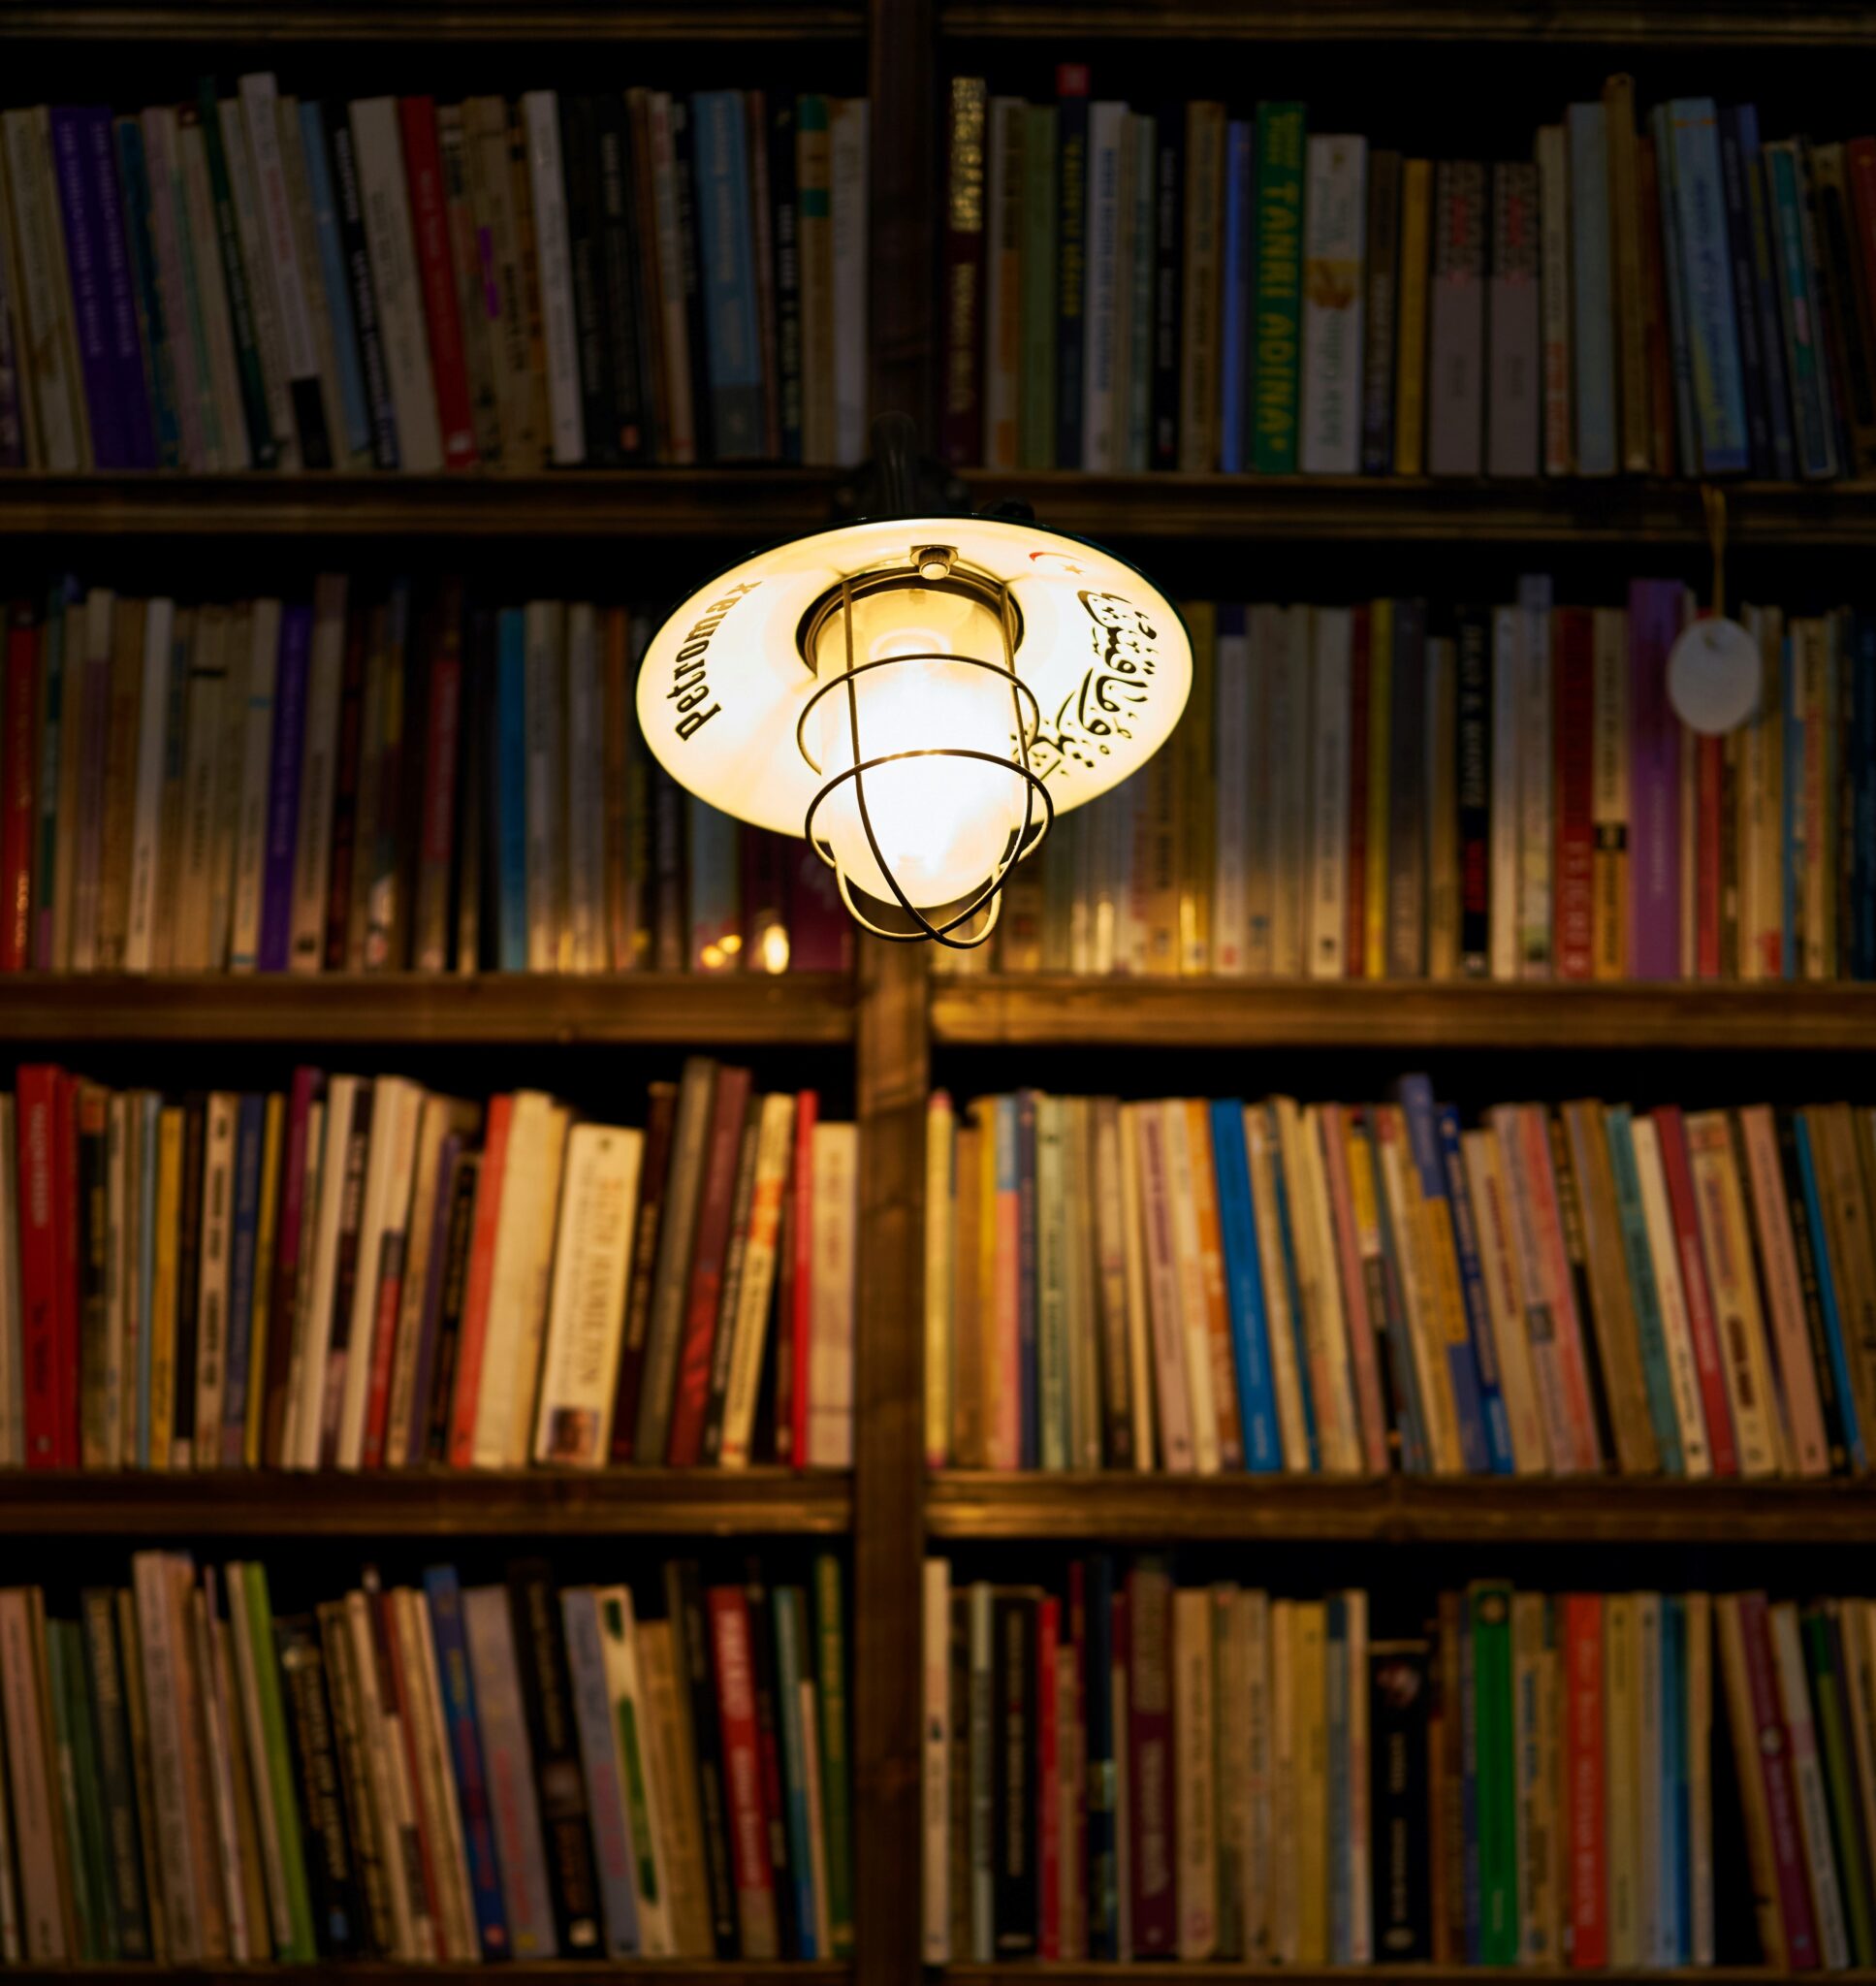 Hanging ceiling lamp overlooking a bookcase full of books.